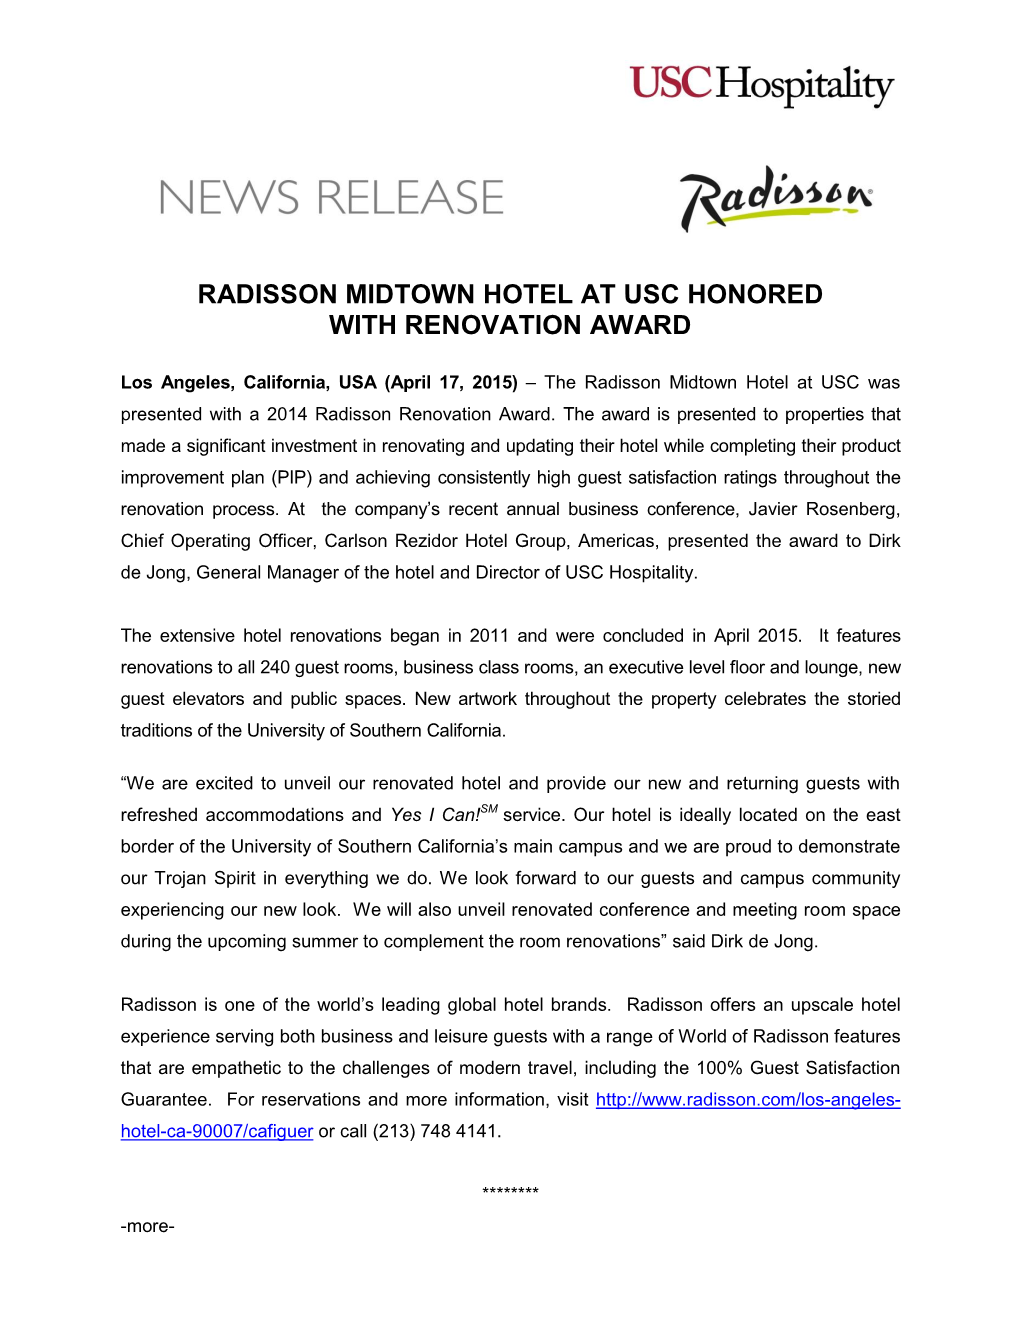 Radisson Midtown Hotel at Usc Honored with Renovation Award